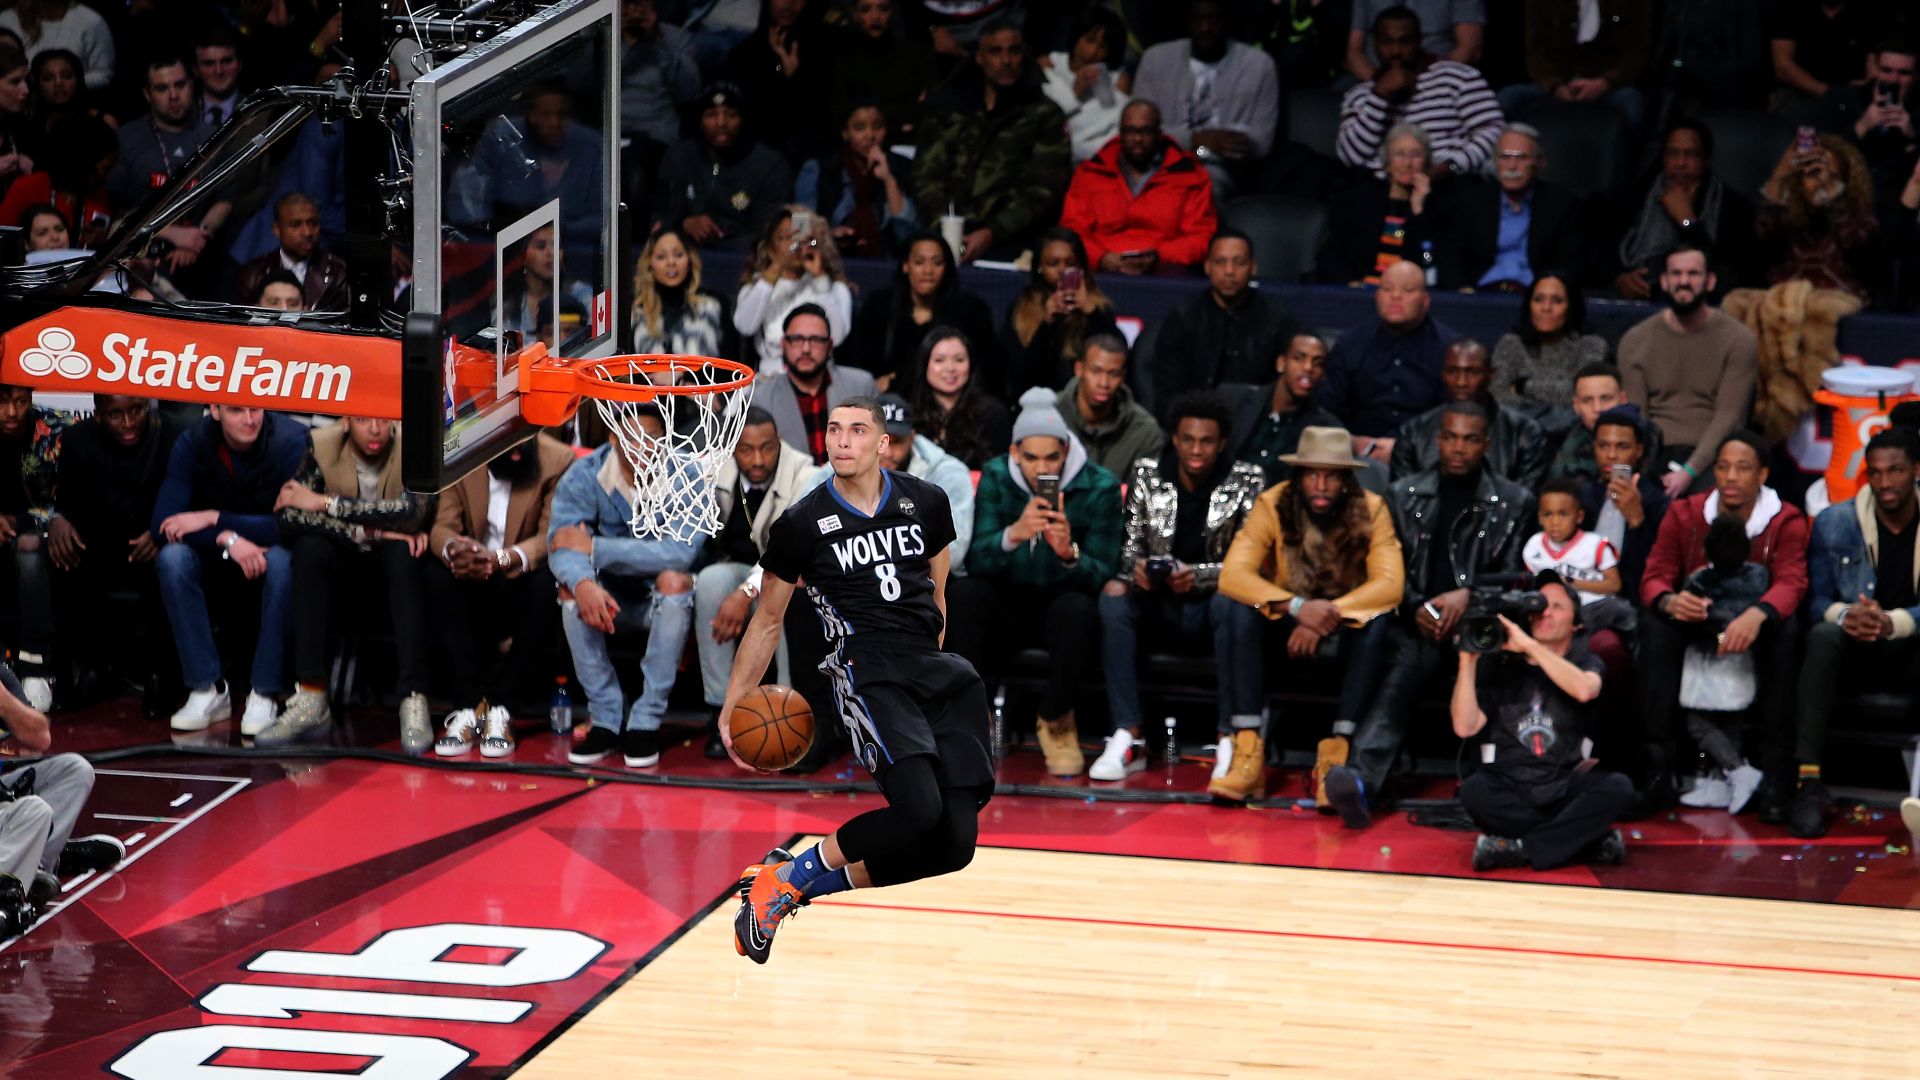 NBA Dunk Contest's 86 perfect score dunks, ranked 